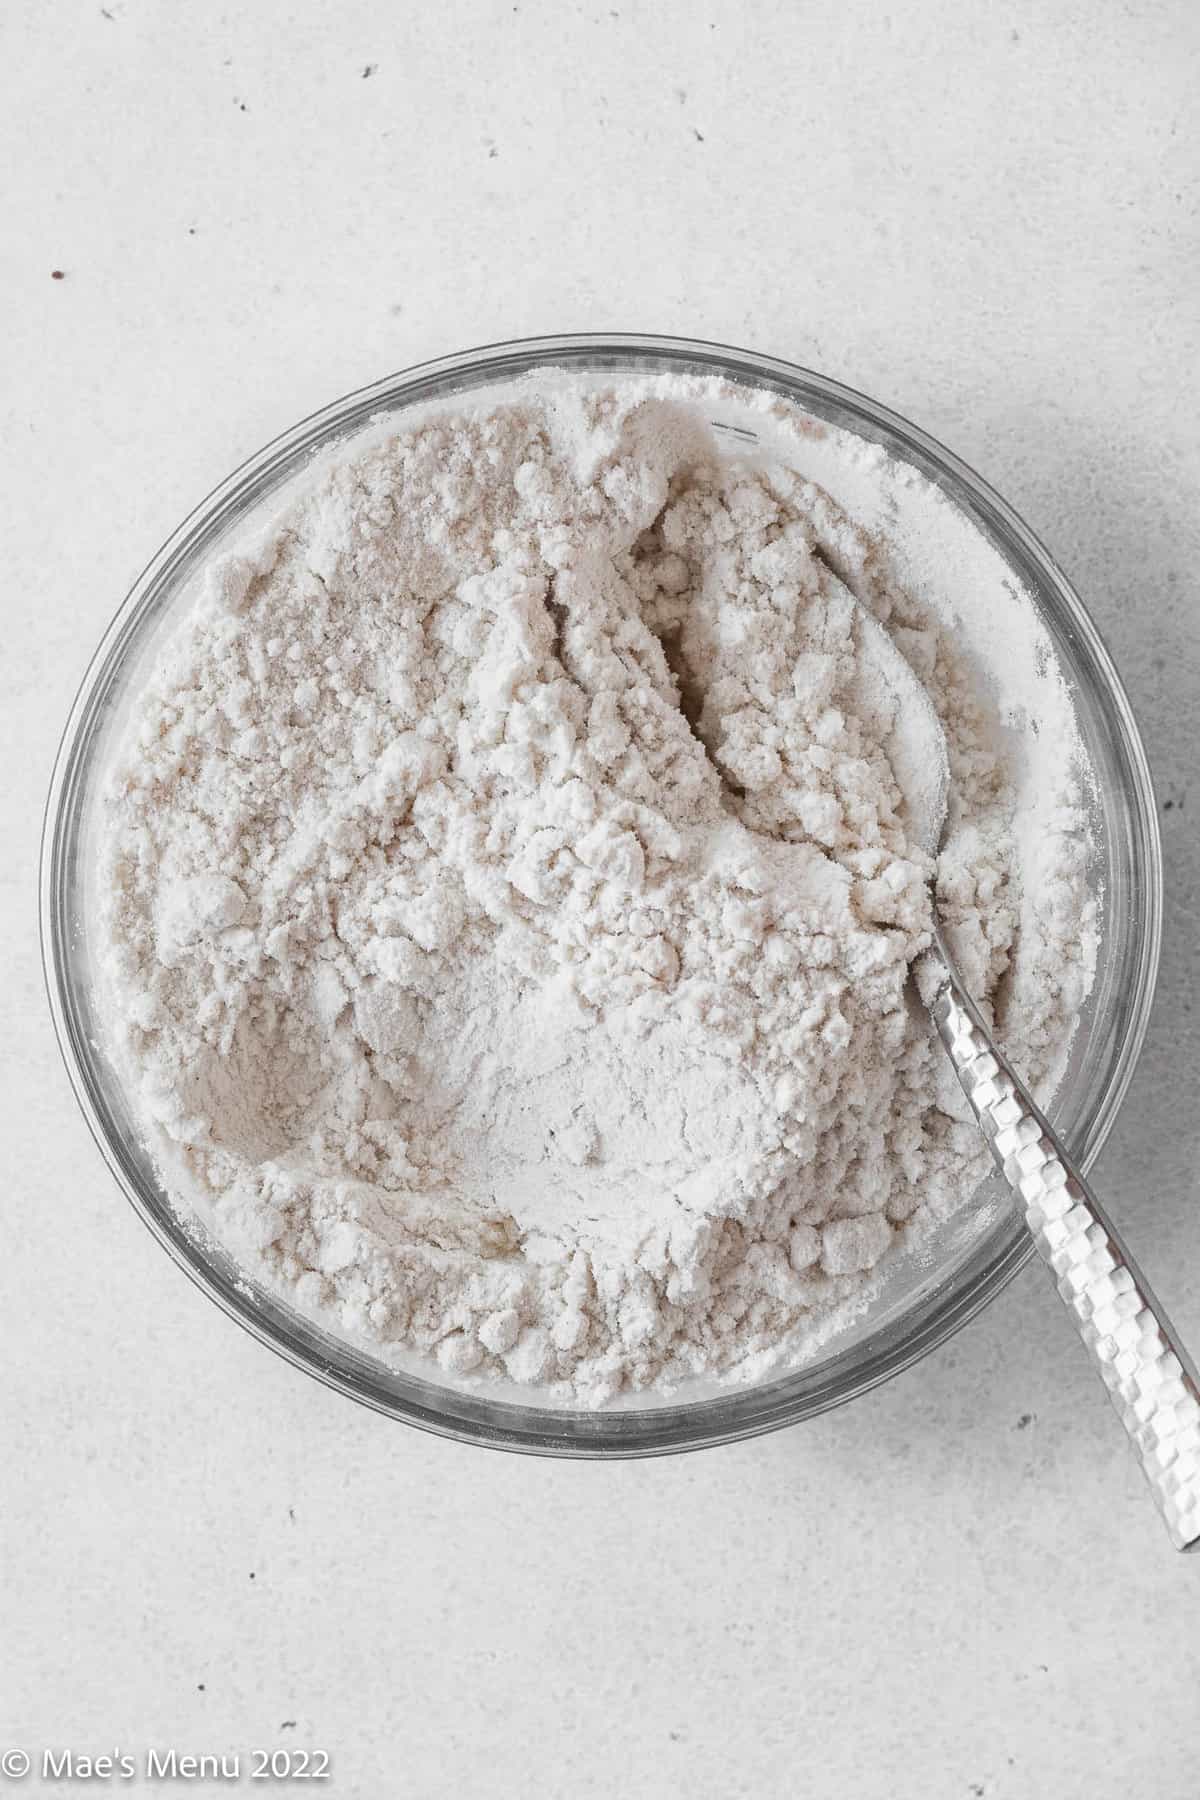 A glass mixing bowl of flour with a whisk.